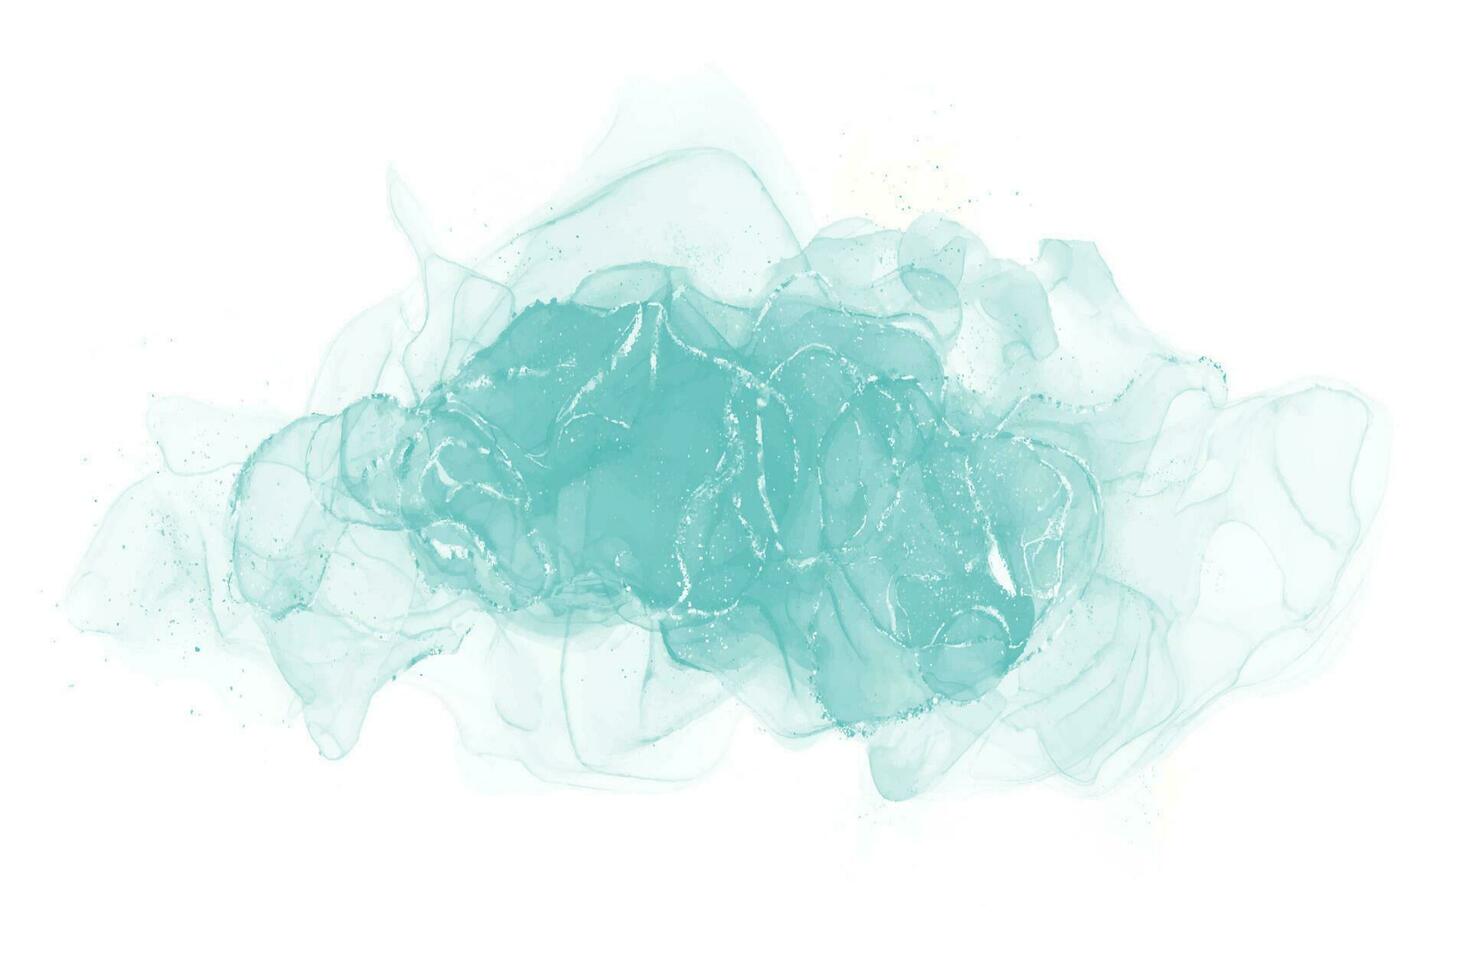 Watercolor alcohol ink liquid splash on white background. Blue mint water color stain vector